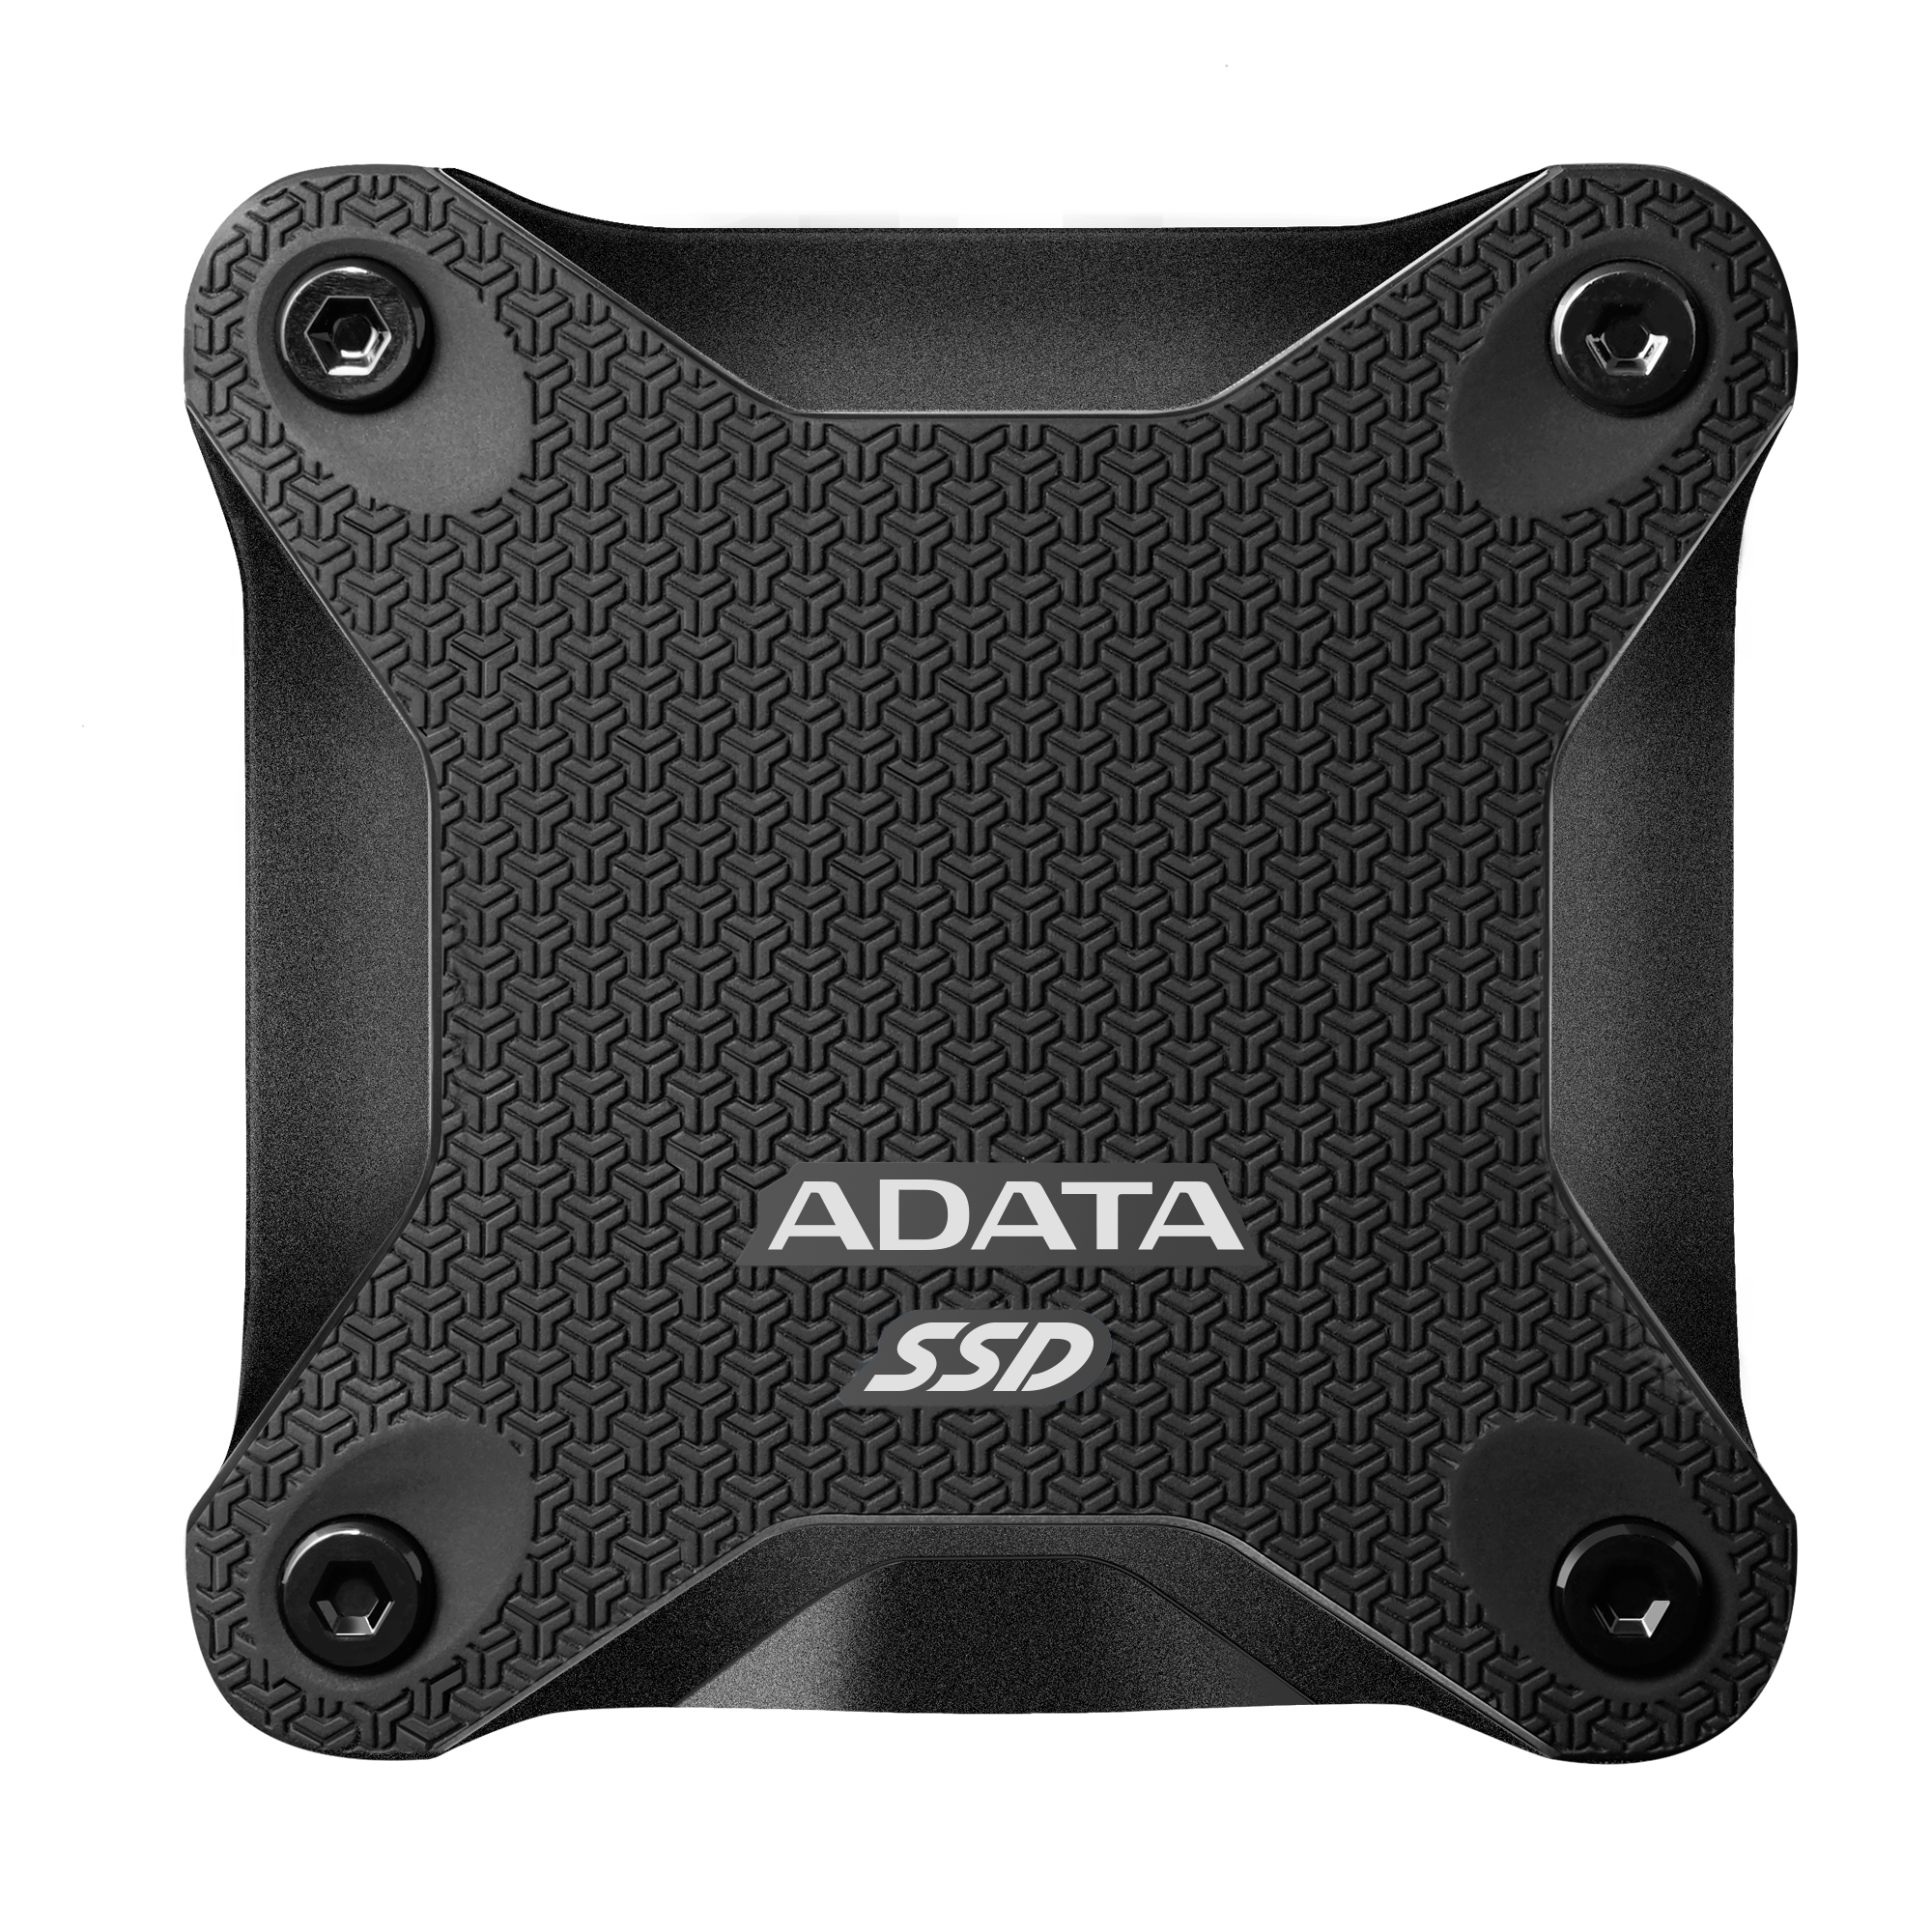 SD620 External Solid State Drive | ADATA (Global)